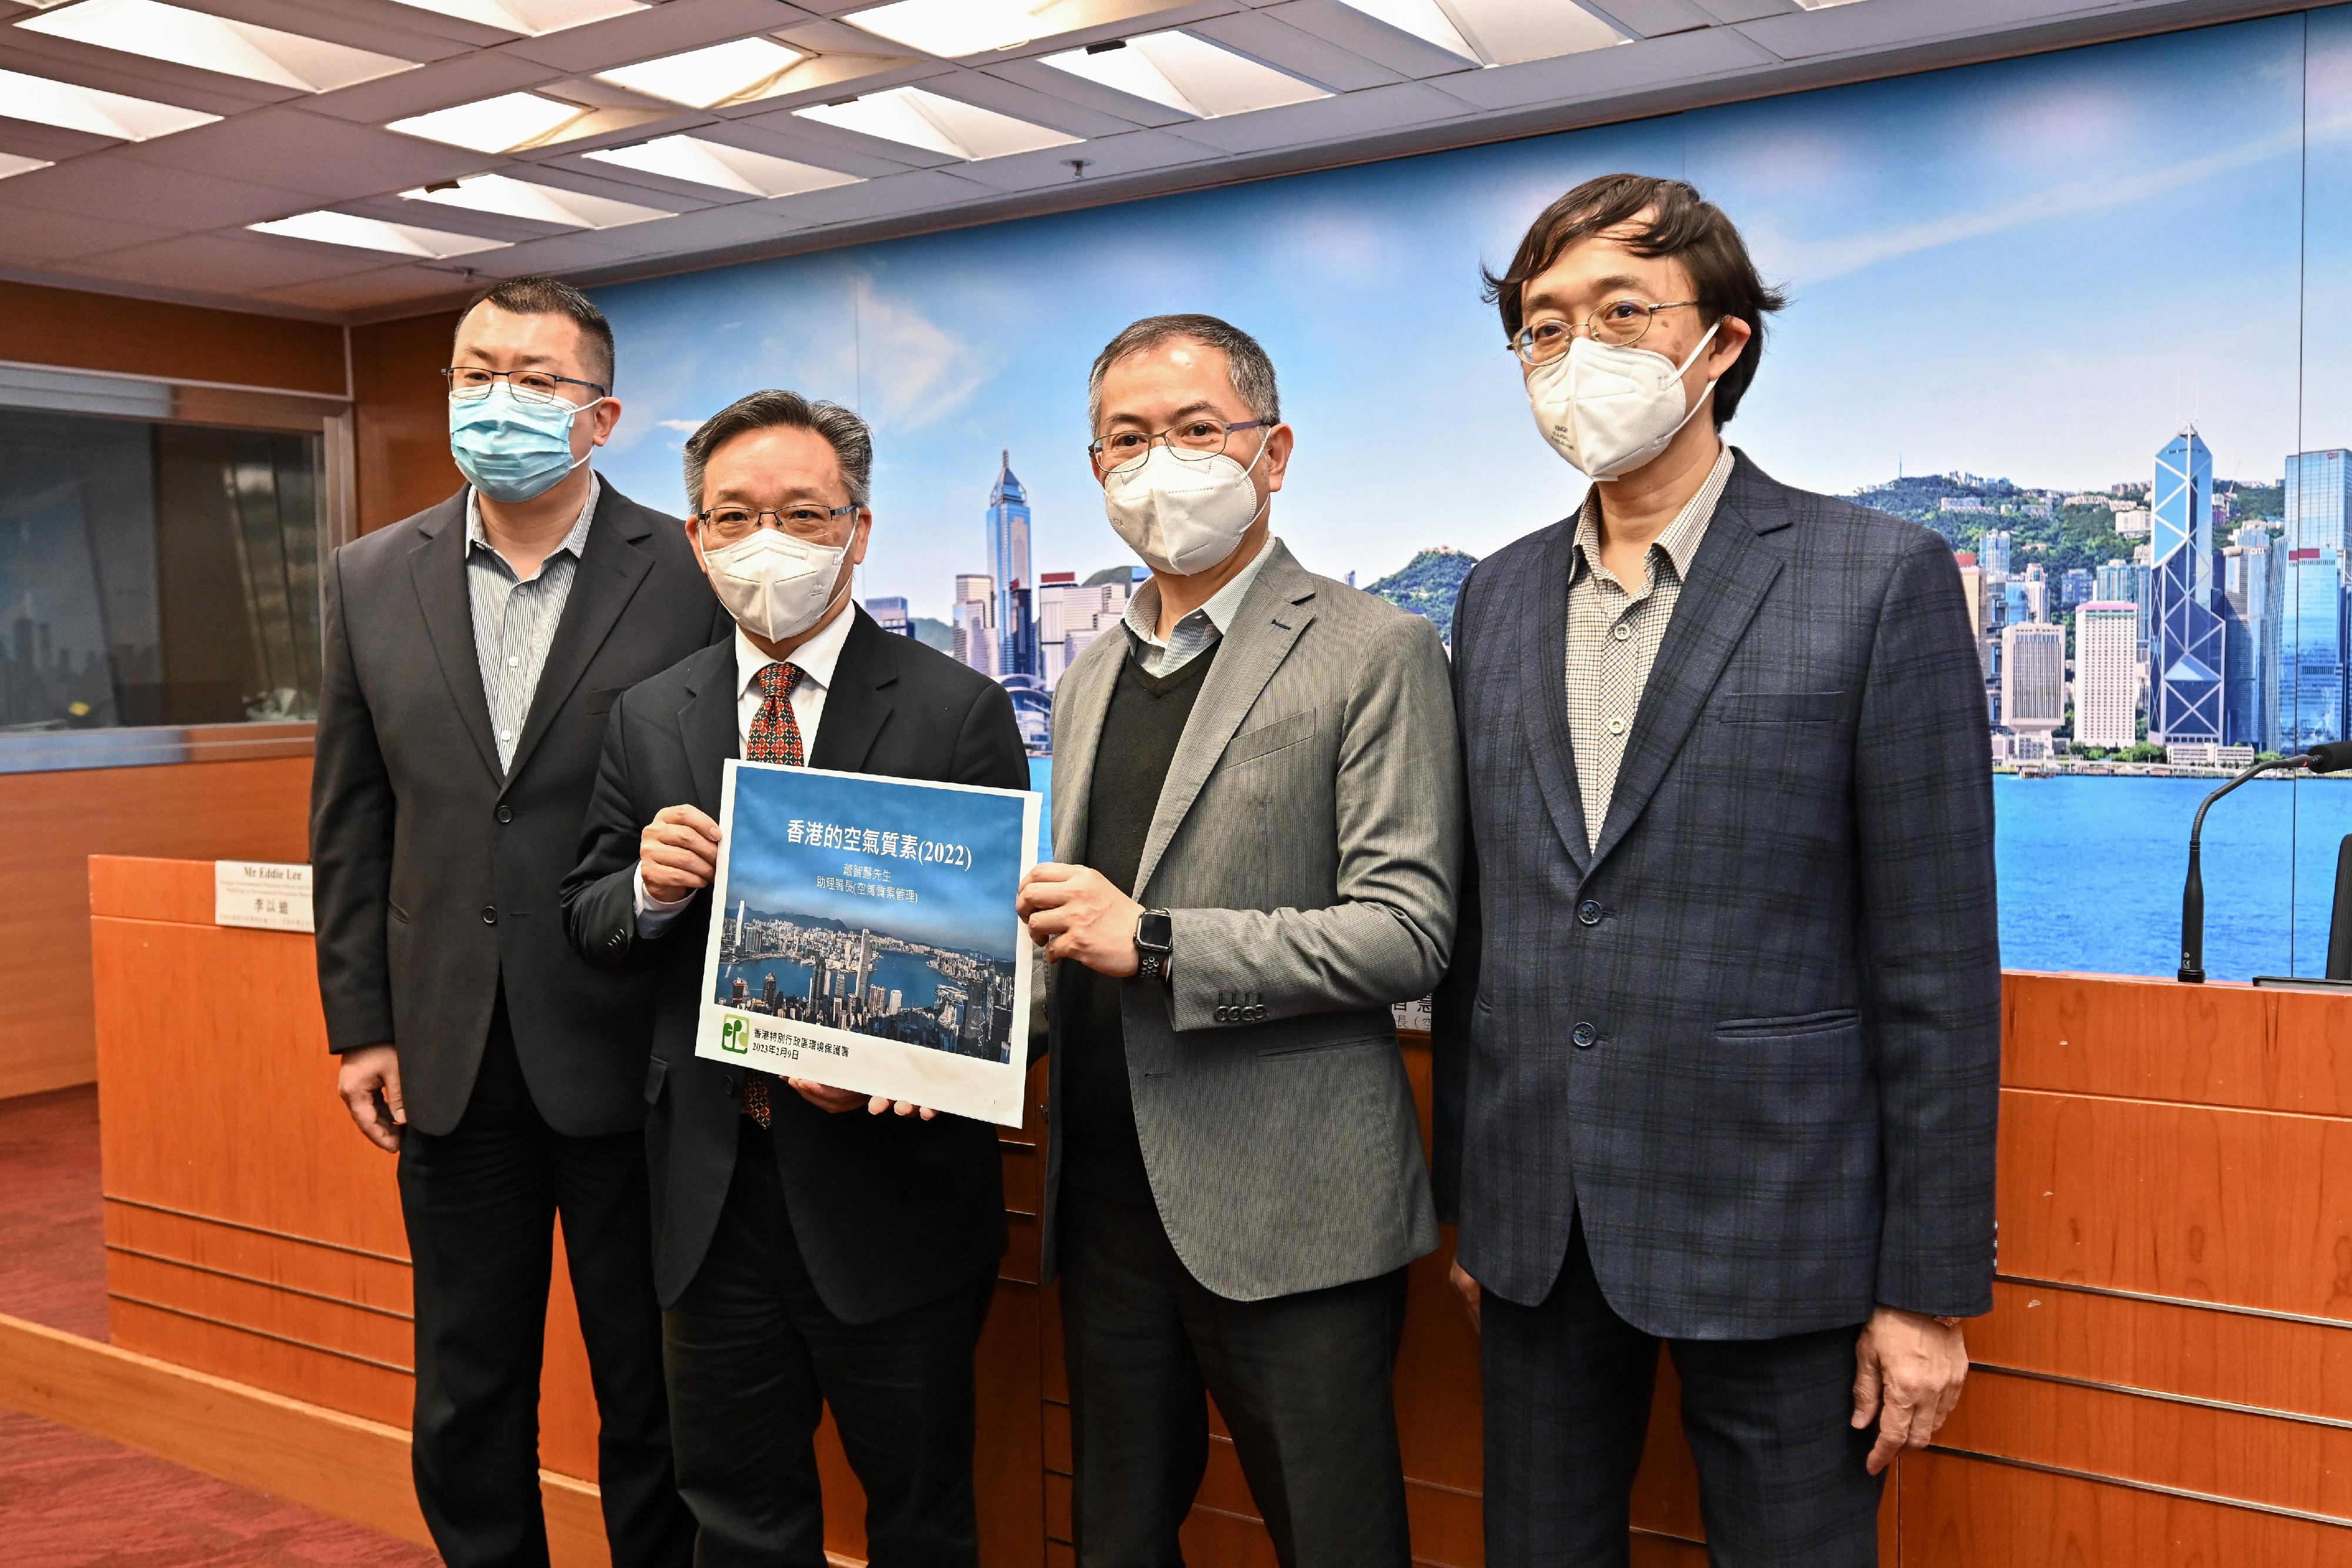 The Environmental Protection Department (EPD) announced today (February 9) an overview of Hong Kong's air quality in 2022. The overall air quality in Hong Kong has shown a discernible improvement. The Principal Assistant Secretary for Environment and Ecology (Air Policy), Dr Kenneth Leung (second left); the Assistant Director of Environmental Protection (Air Quality Management), Mr Stephen Siu (second right); the Principal Environmental Protection Officer (Air Science and Modelling) of the EPD, Mr Eddie Lee (first left); and Senior Environmental Protection Officer (Air Science and Modelling) of the EPD Mr Tony Lee (first right), are pictured before the press briefing.